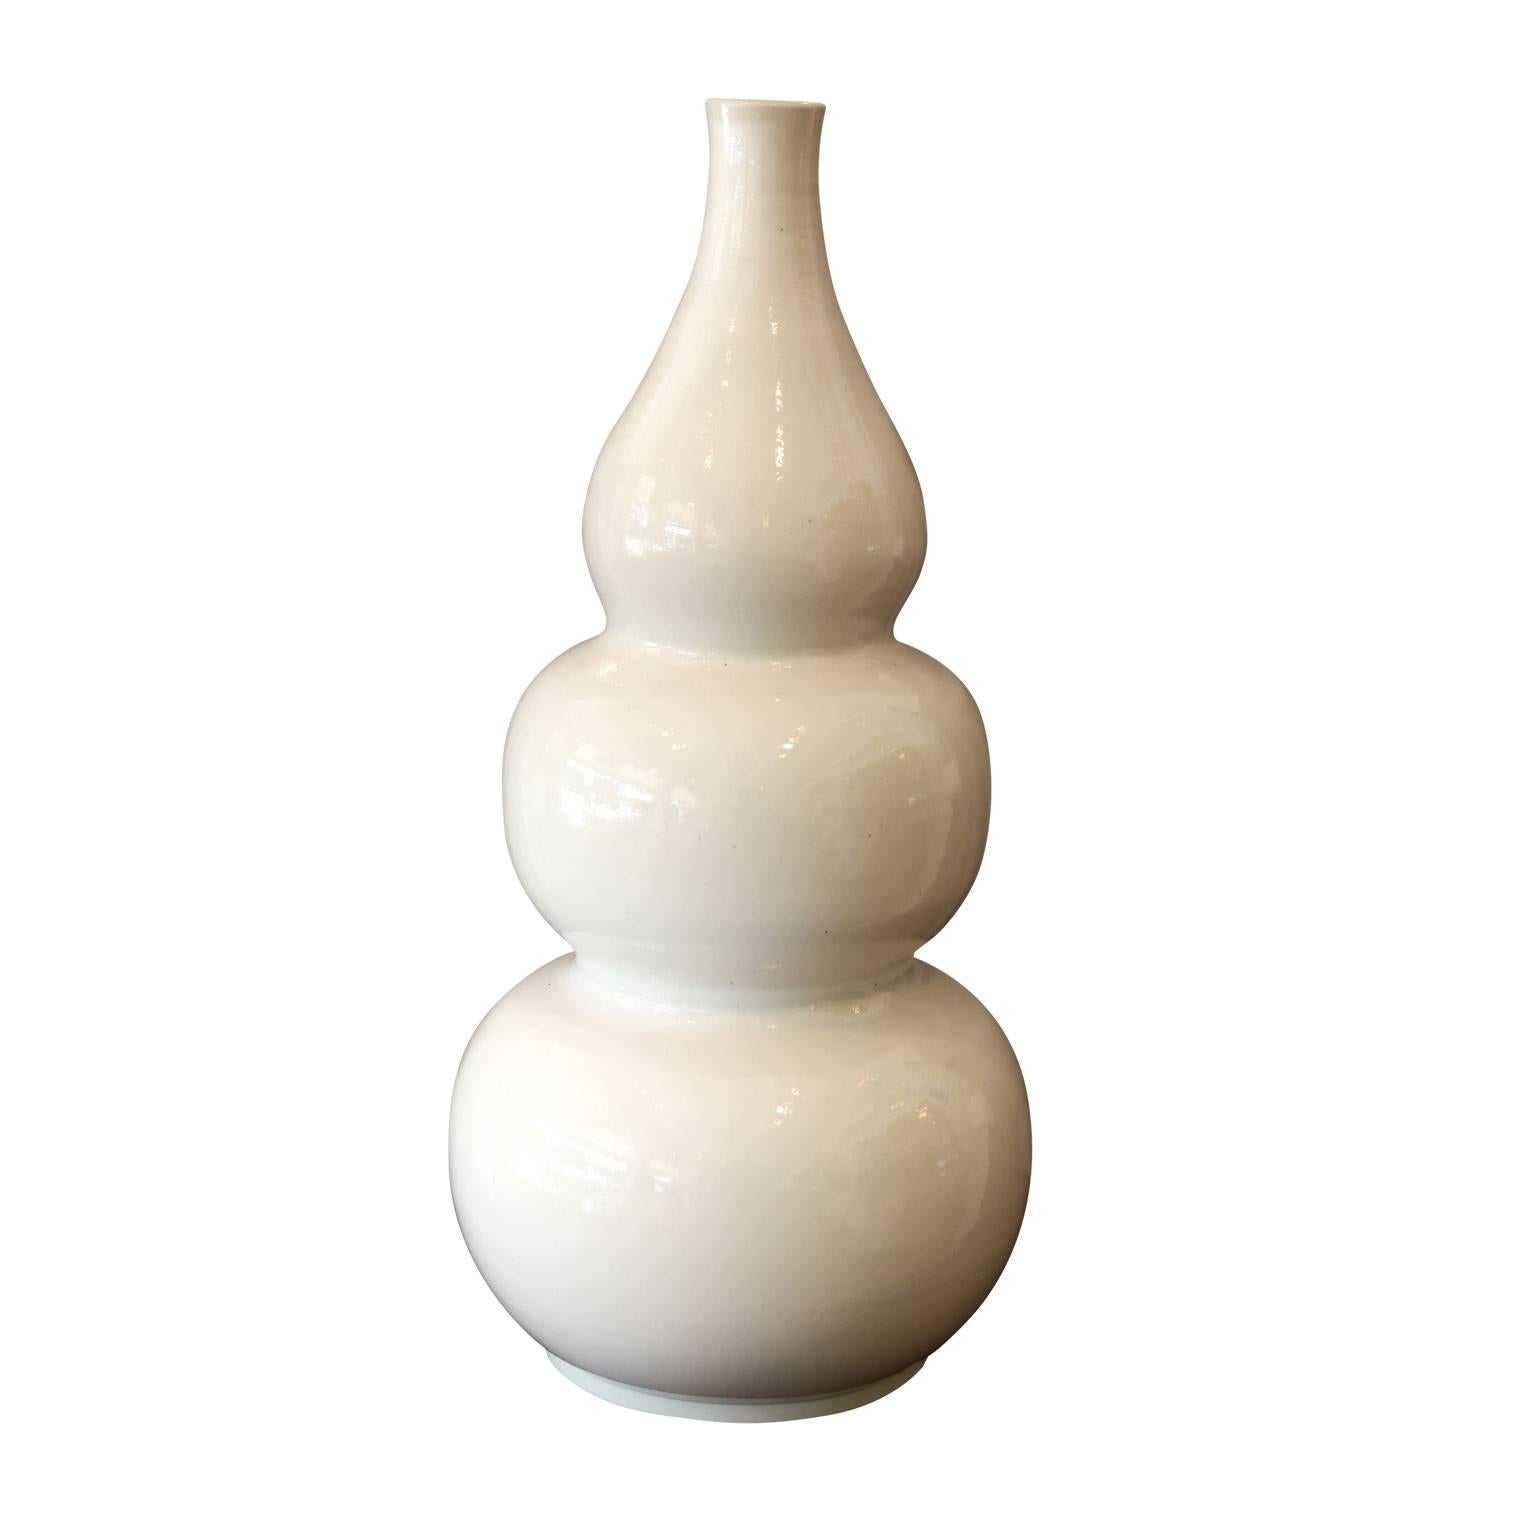 Two substantial vintage white gourd-shape vases, circa 1960-1980. Nice robust gourd-shape with rich, milky glazed finish and gorgeous subtle patina. Sold individually and priced $2,300 each.